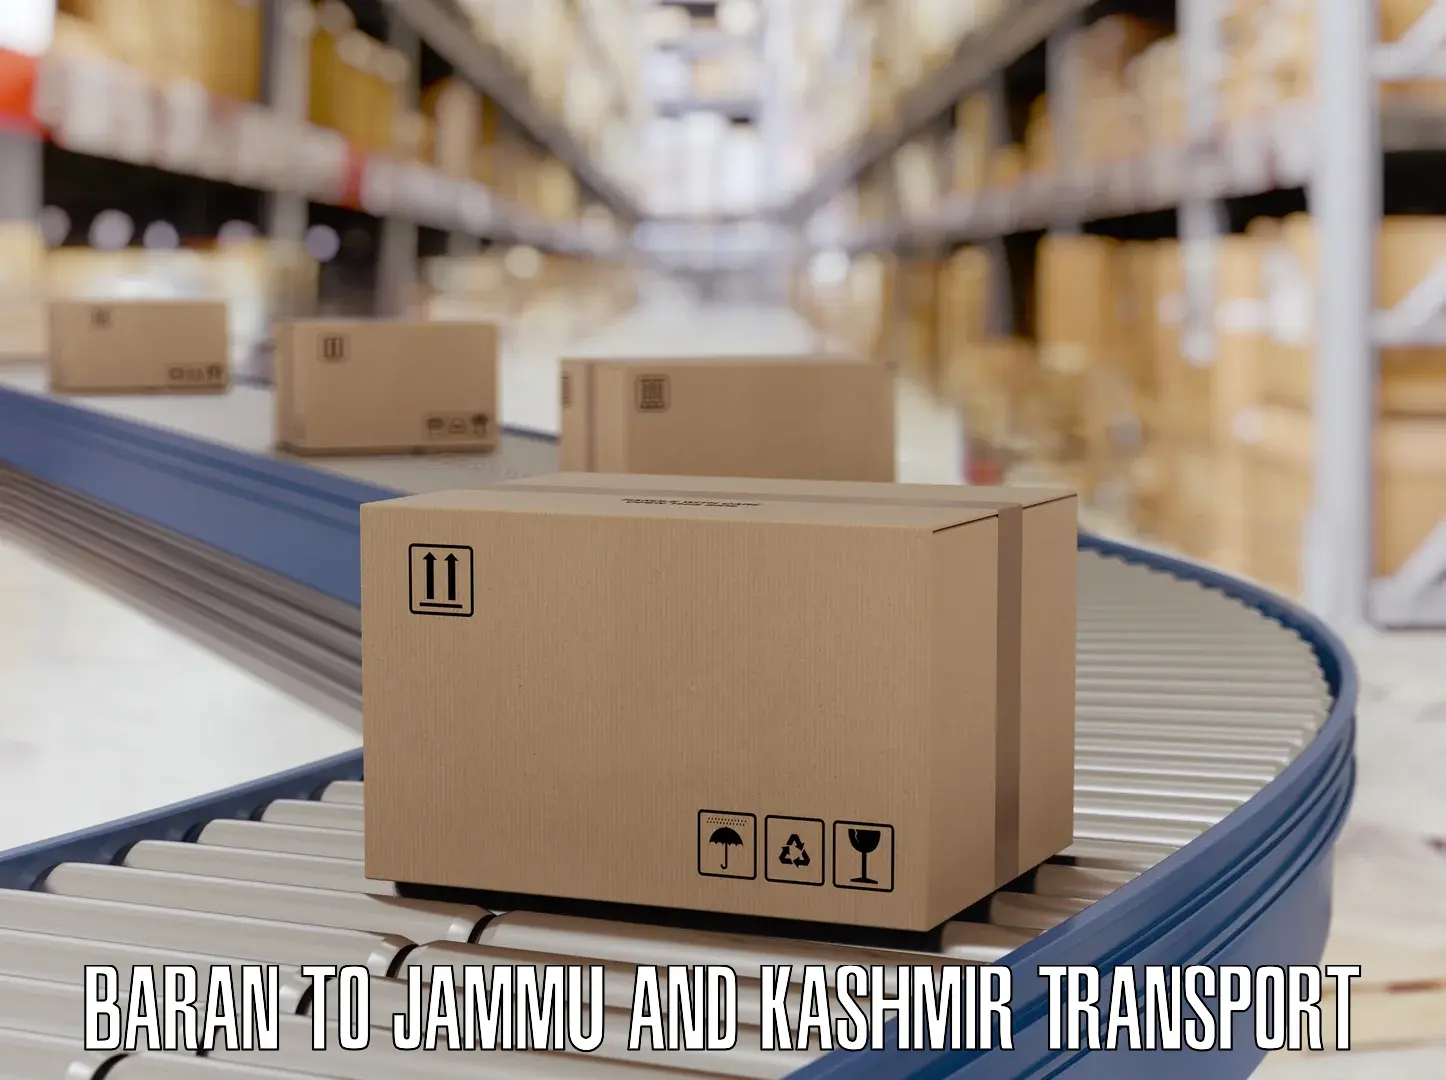 Vehicle transport services in Baran to Jammu and Kashmir